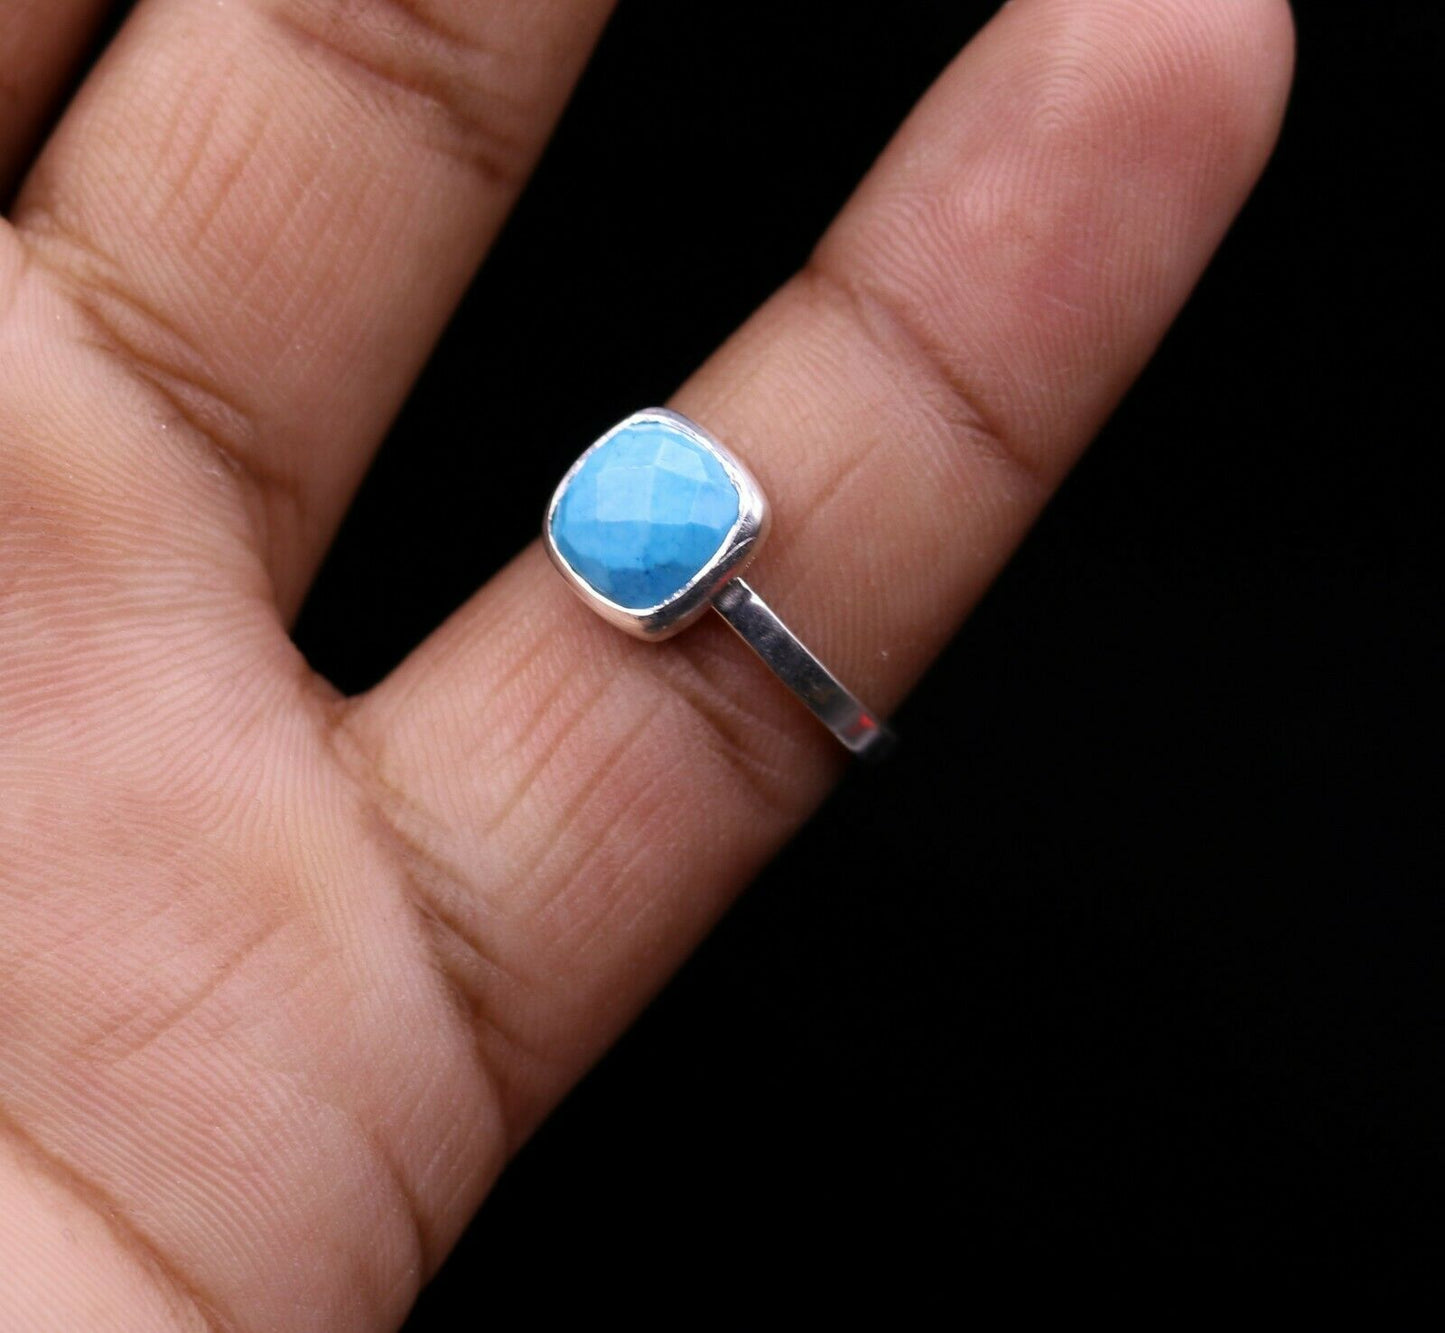 BLUE TURQUOISE STONE 925 SOLID SILVER UNISEX RING BAND GORGEOUS JEWELRY sr90 - TRIBAL ORNAMENTS